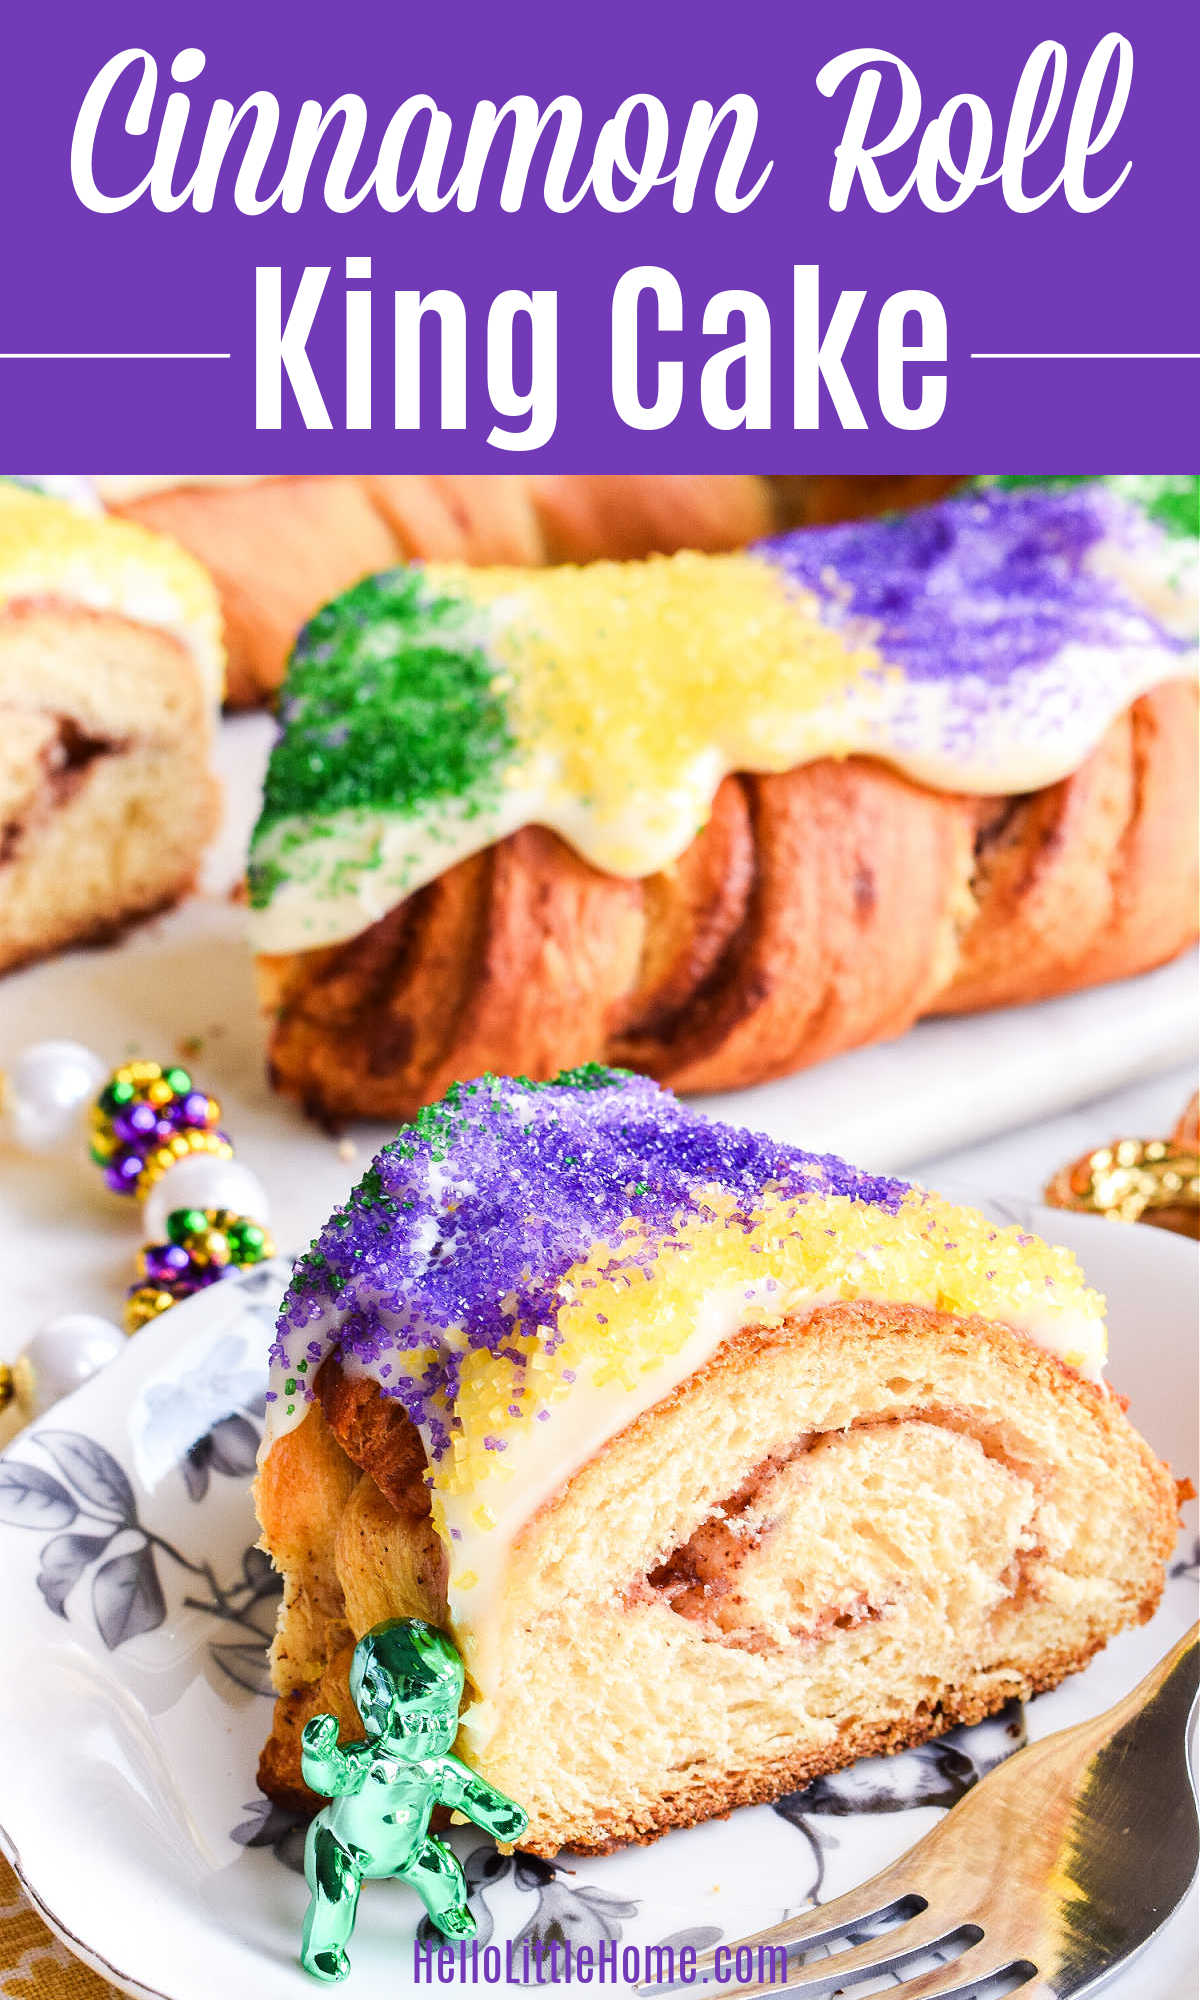 A slice of Cinnamon Roll King Cake served on a small plate.